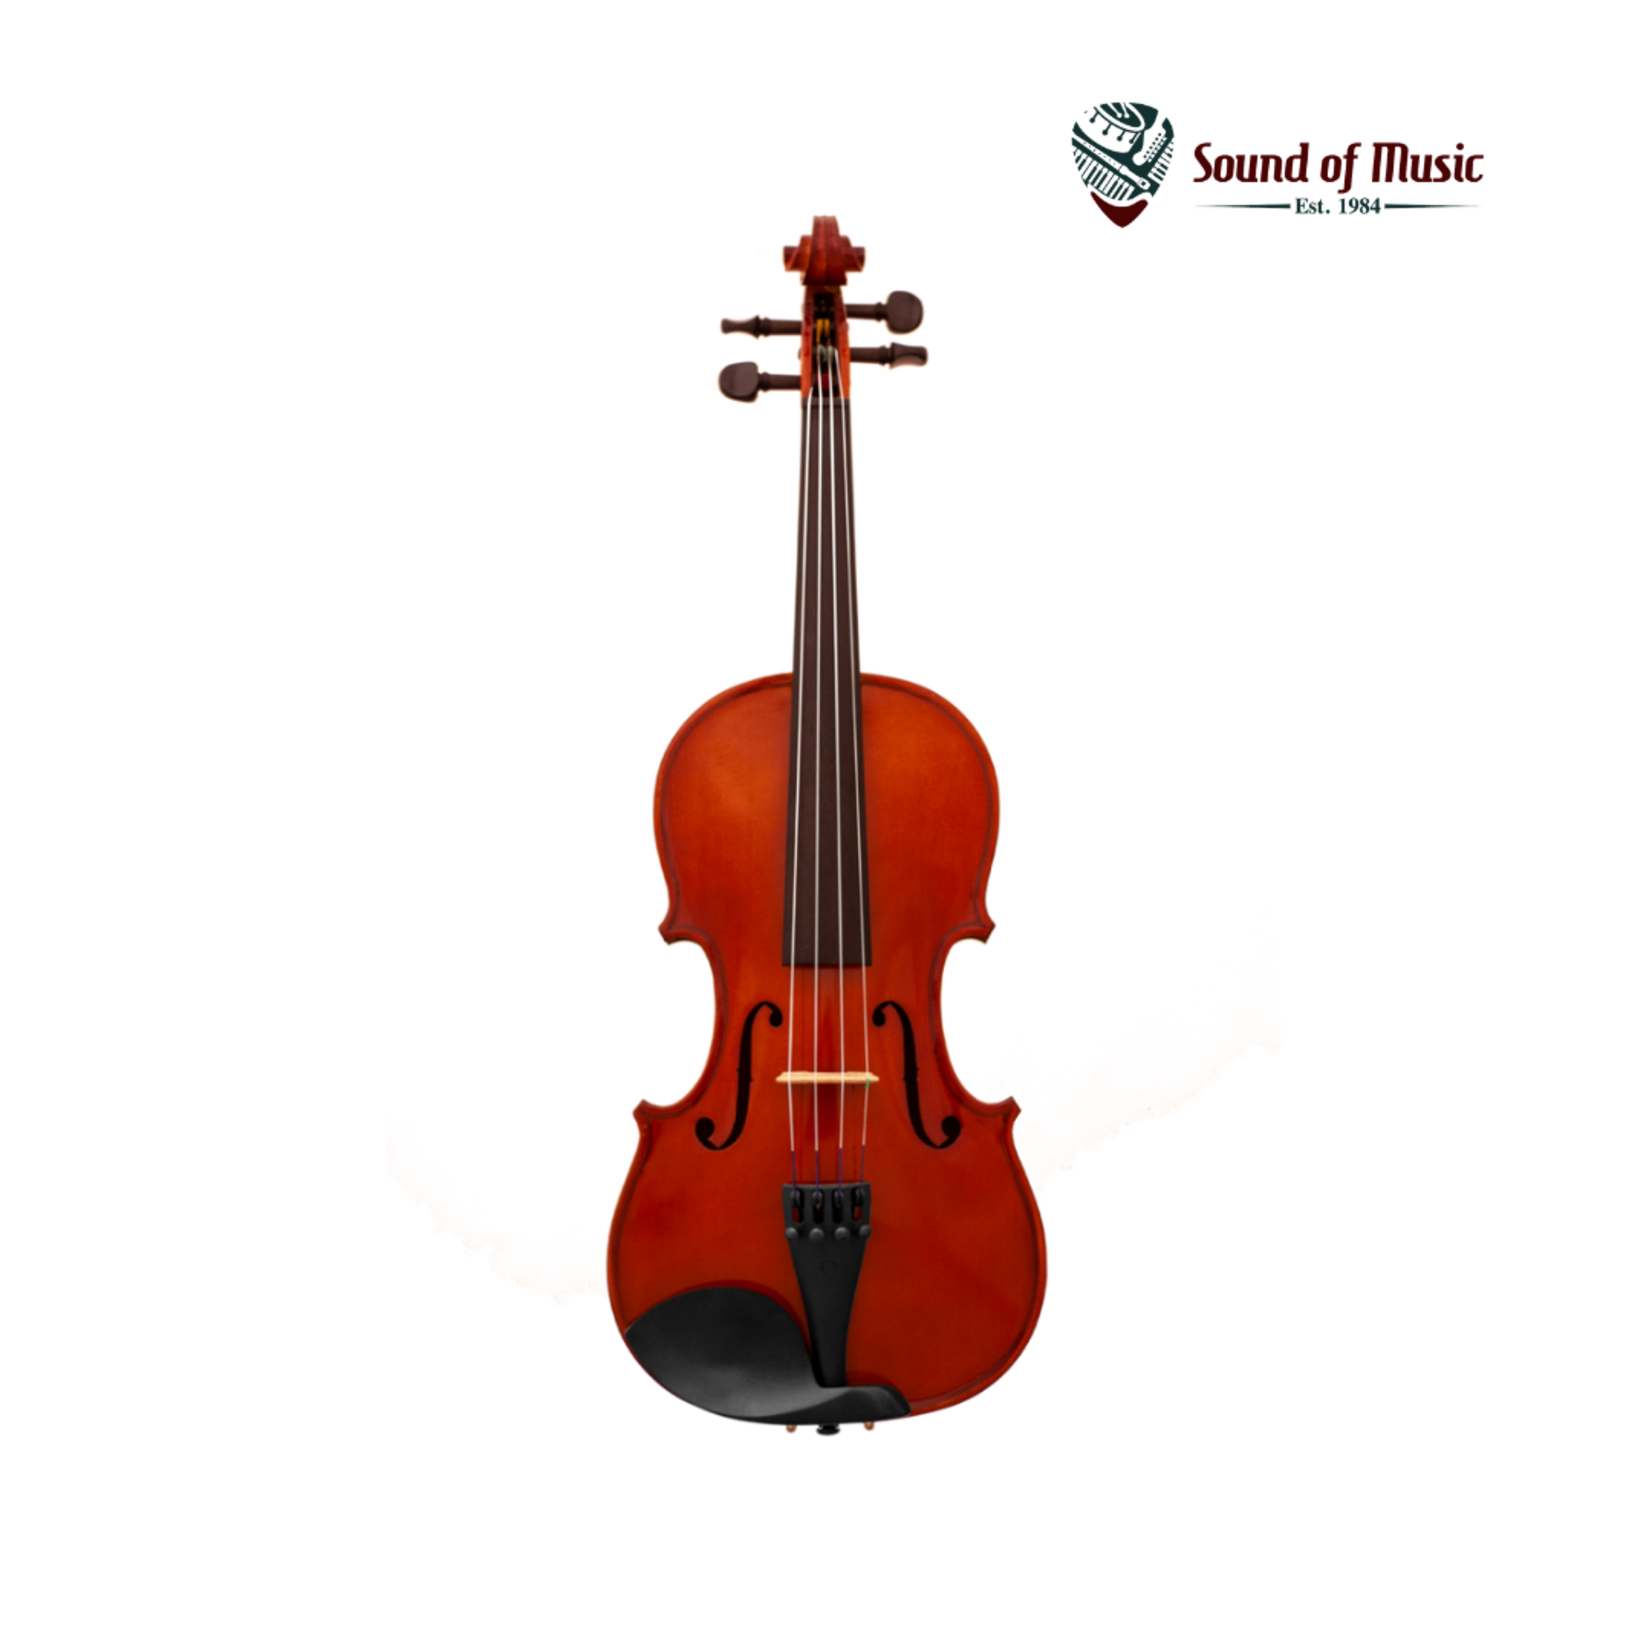 Sound of Music 1/8 Violin Outfit W/Glasser Bow & Hardshell Case